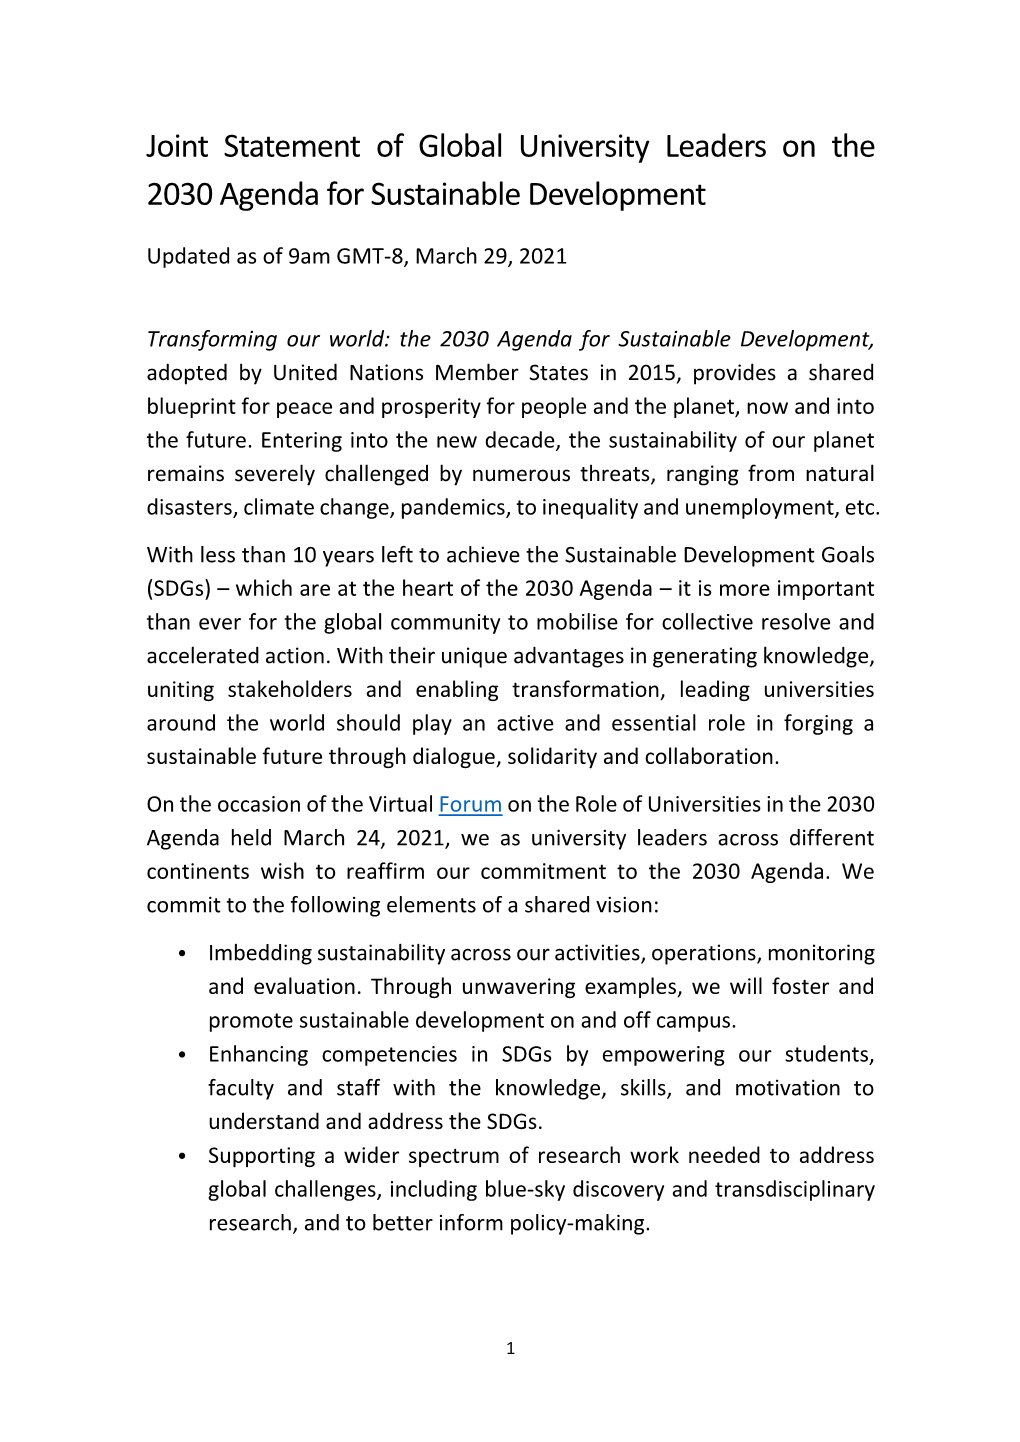 Joint Statement of Global University Leaders on the 2030 Agenda for Sustainable Development